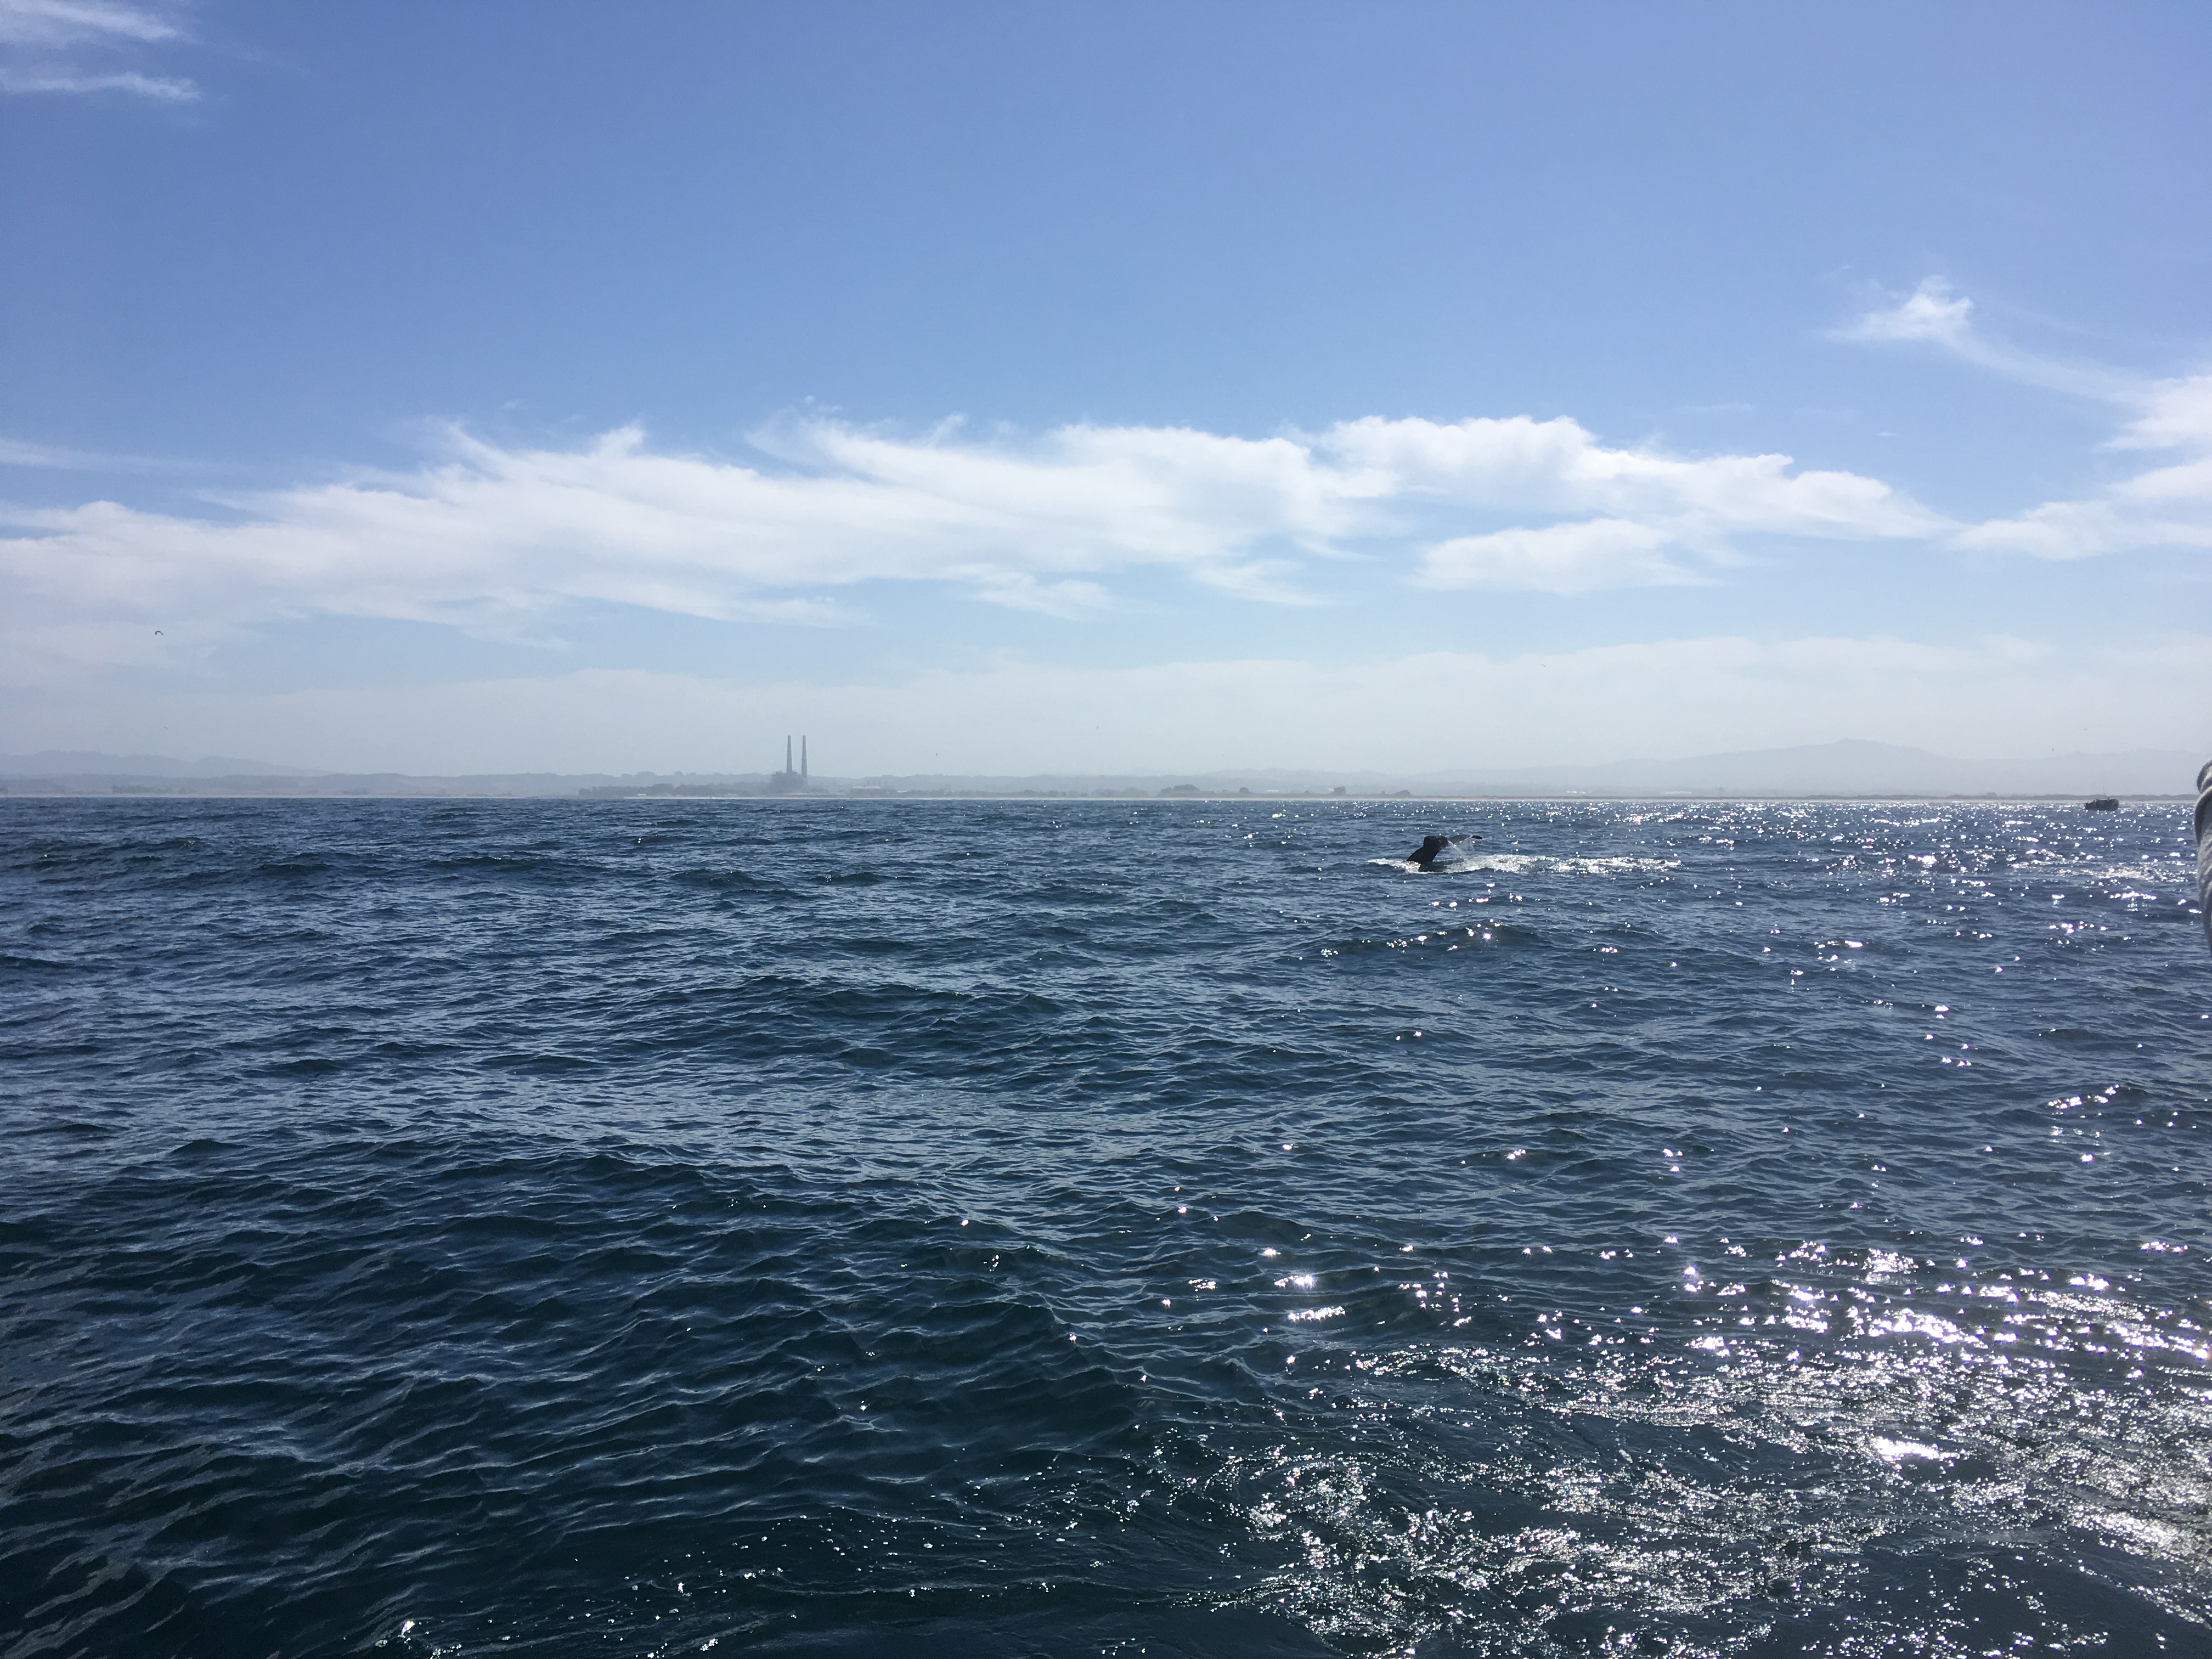 The Pacific Ocean, as seen from a whale-watching boat. There may or may not be a whale tail just barely visible in the distance.